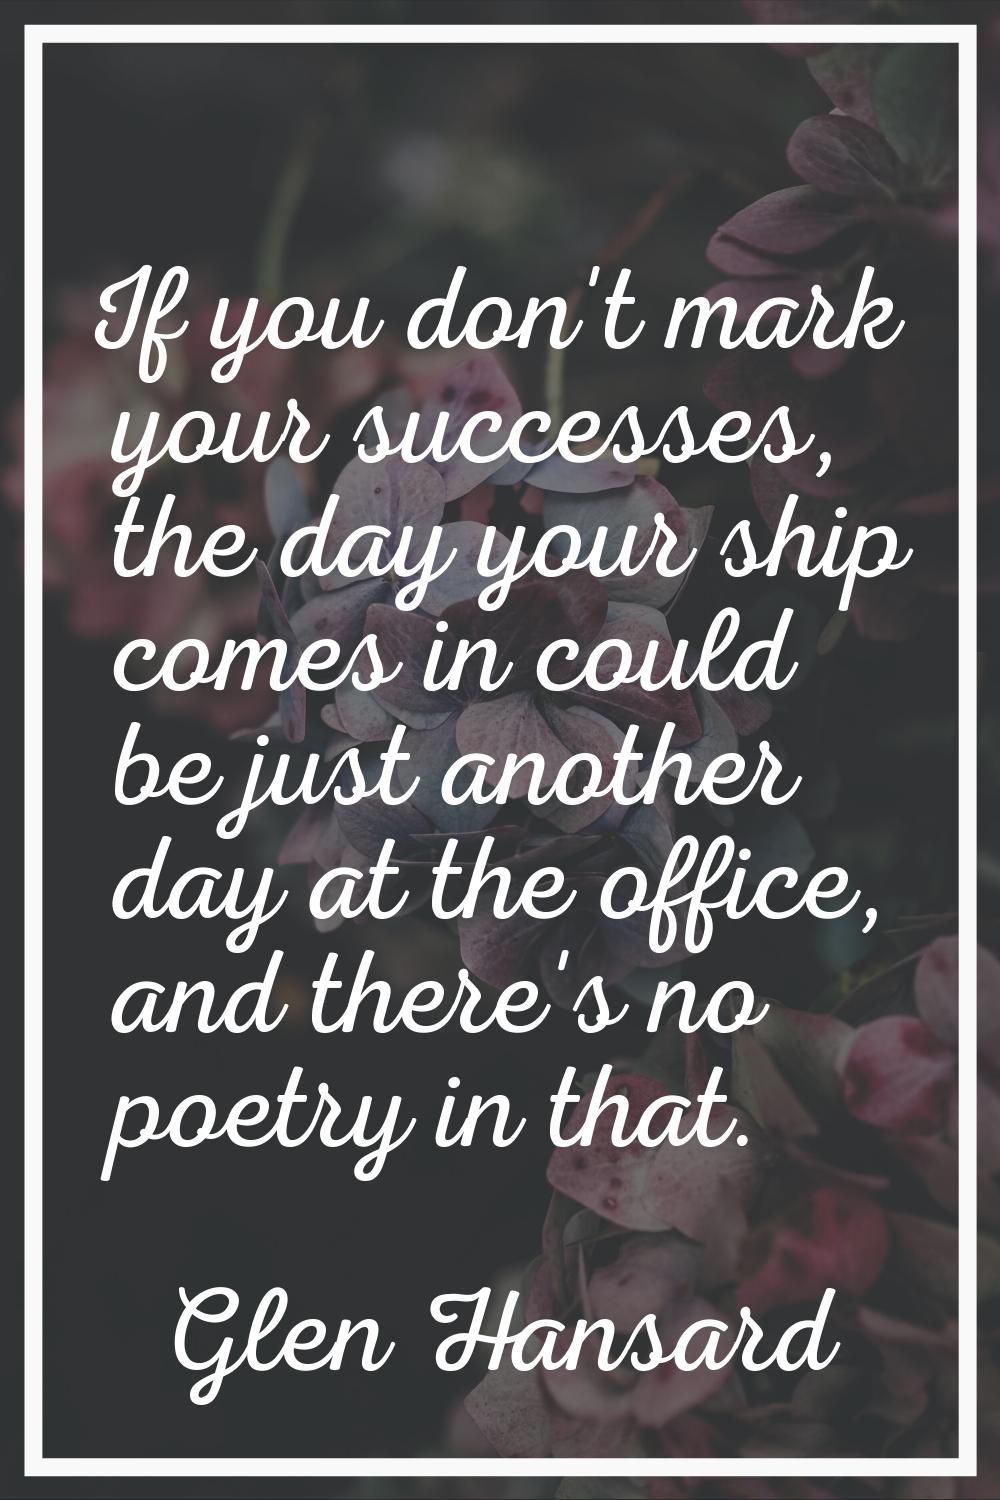 If you don't mark your successes, the day your ship comes in could be just another day at the offic